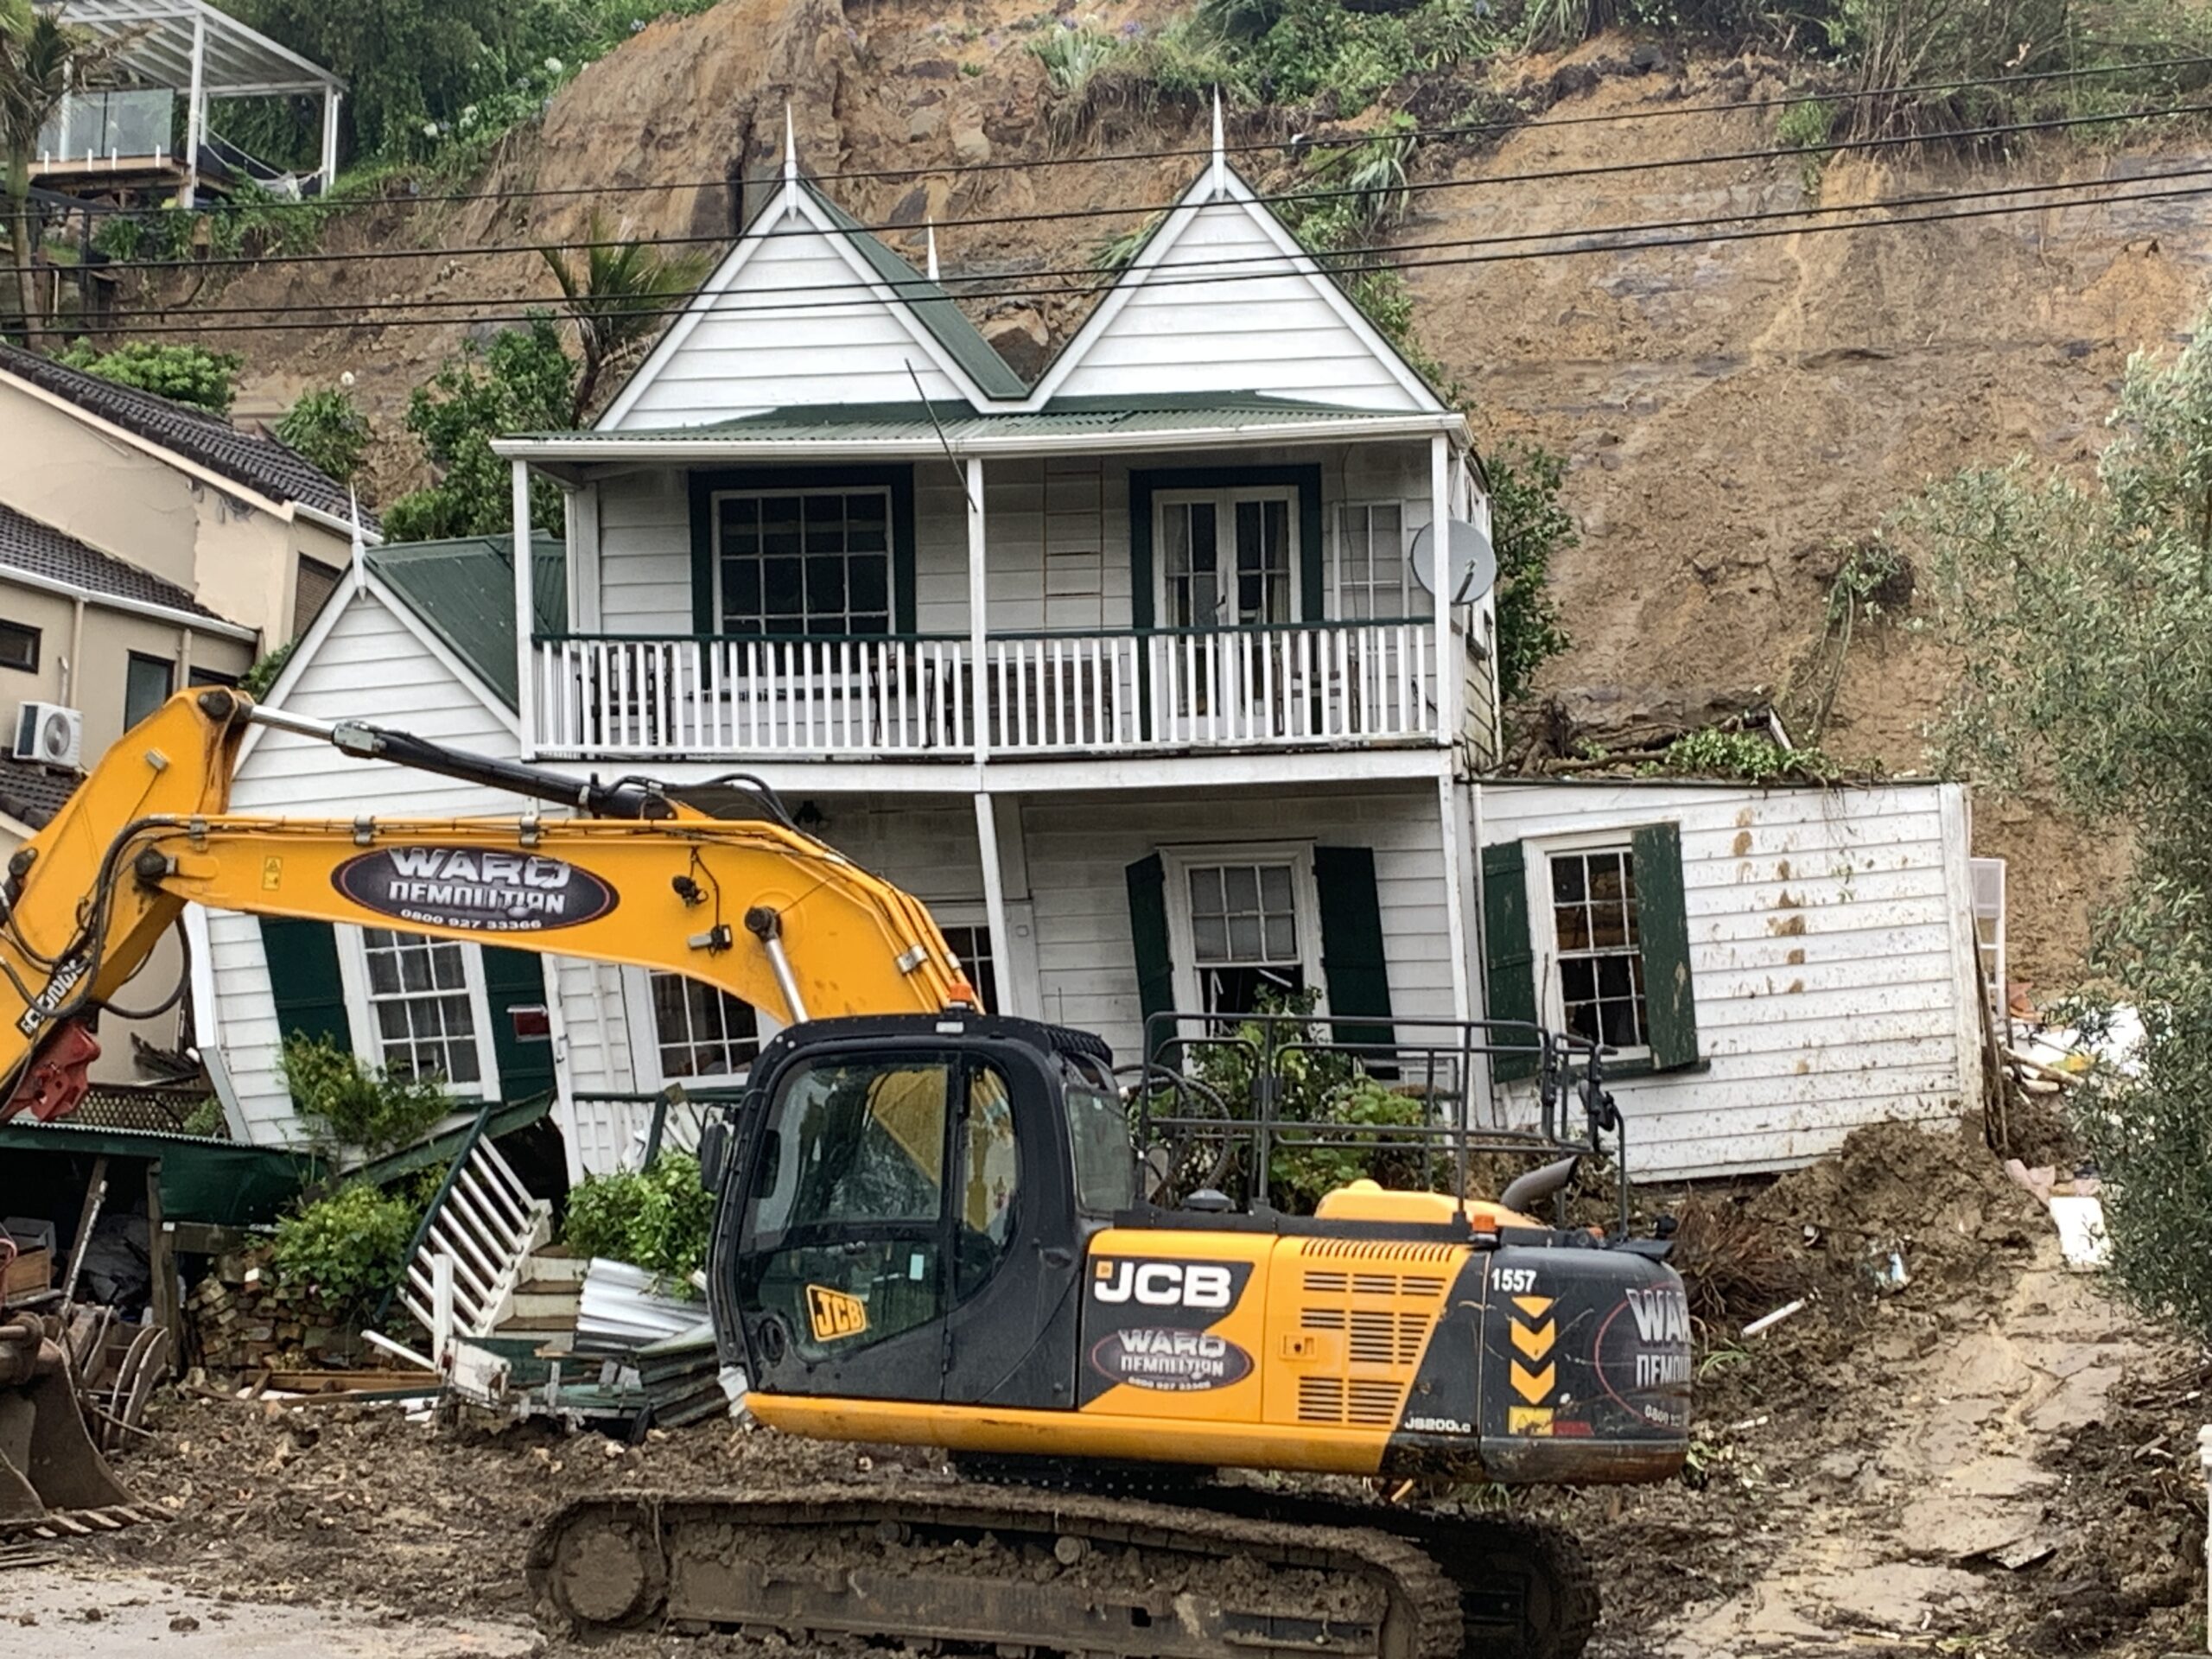 One hundred years of flooding and landslides on Shore Road in Remuera